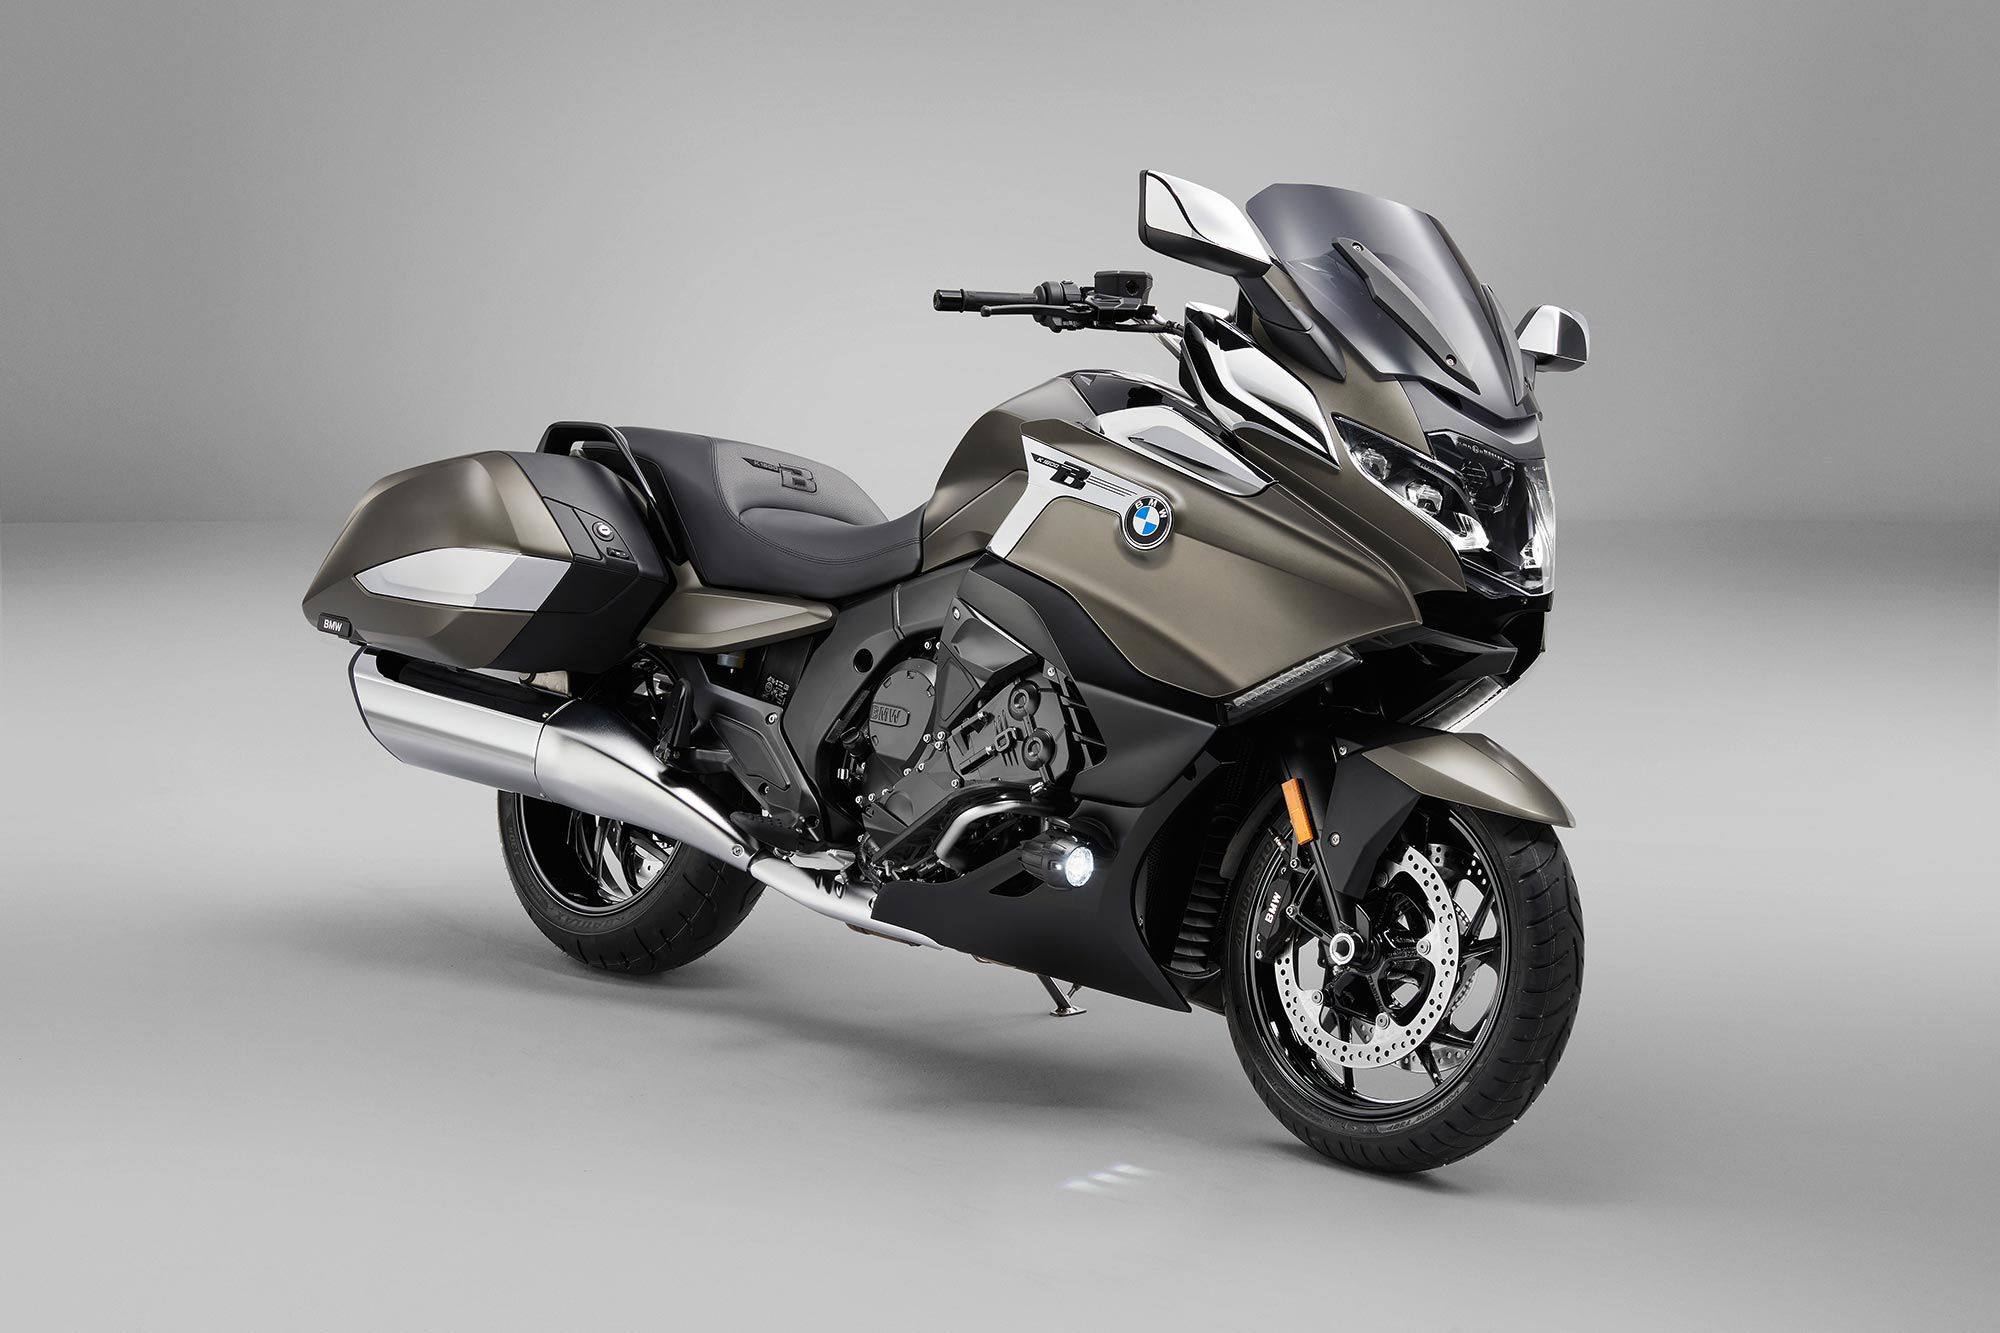 Engine revisions bring the K 1600 line into Euro 5 compliance.